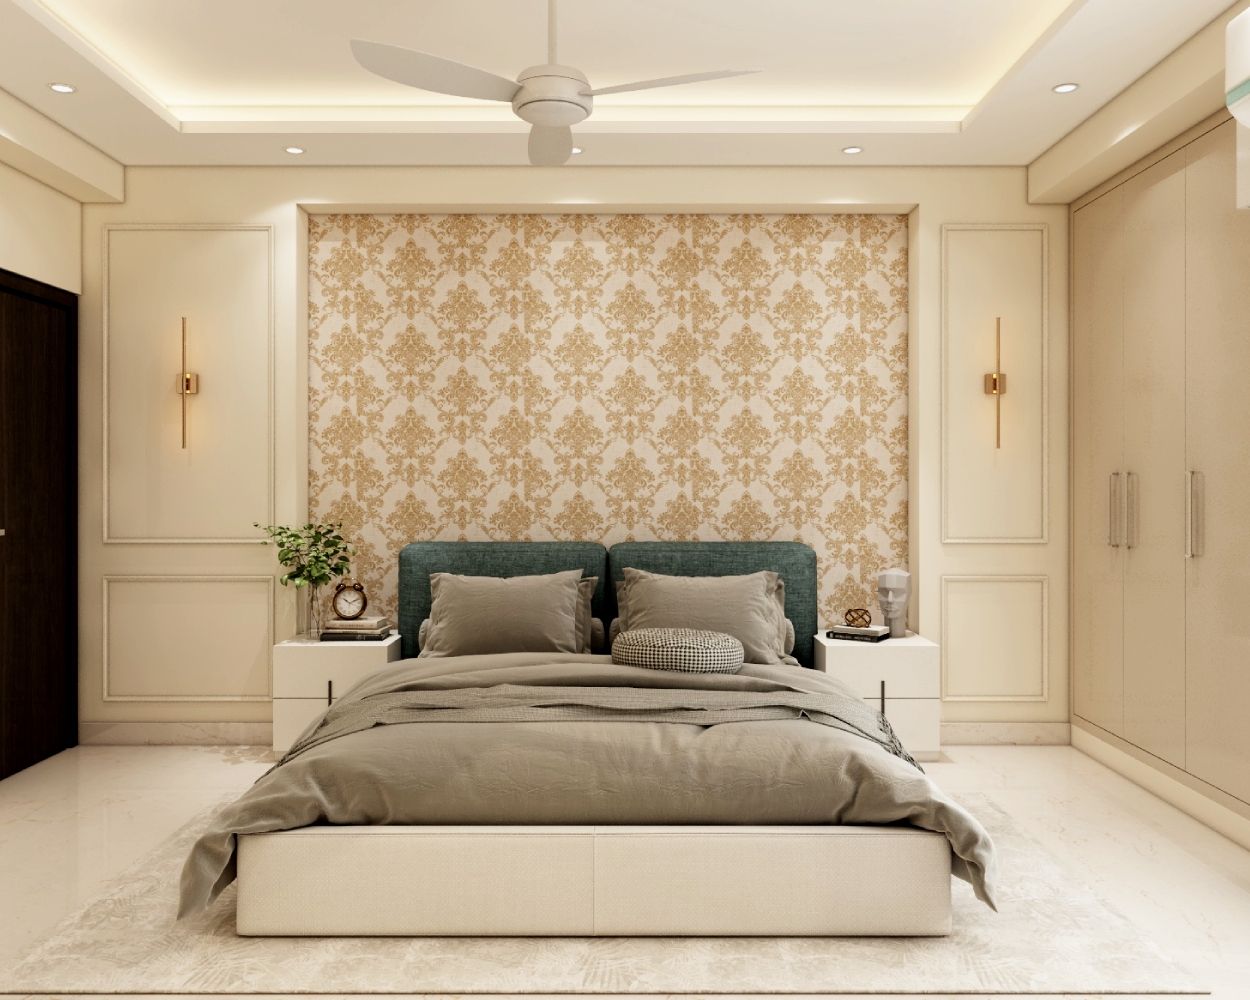 Contemporary Cream And Beige Bedroom Wall Design With Paint And Damask Wallpaper